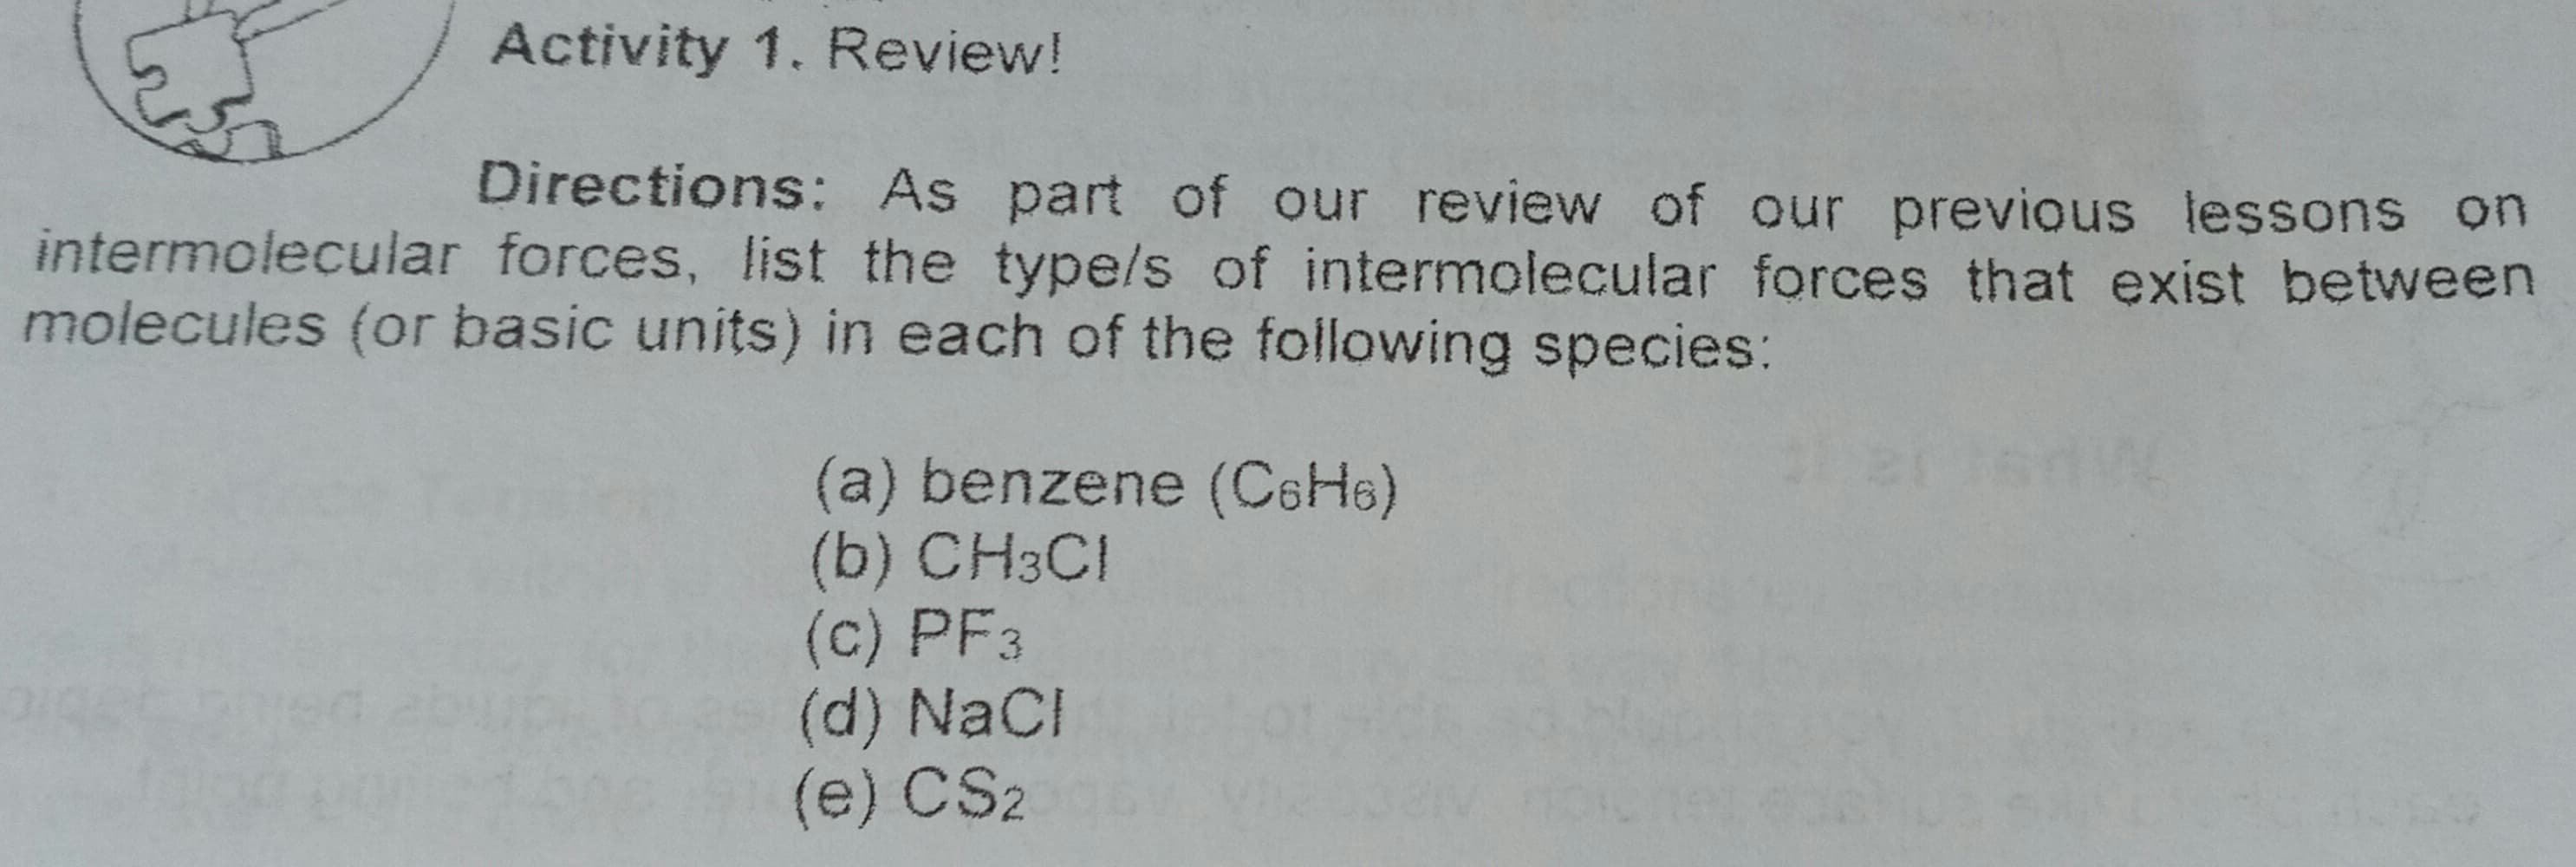 Directions: As part of our review of our previous lessons on
intermolecular forces, list the type/s of intermolecular forces that exist between
molecules (or basic units) in each of the following species:
(a) benzene (C6H6)
(b) CH3CI
(c) PF3
(d) NaCl
(e) CS2
